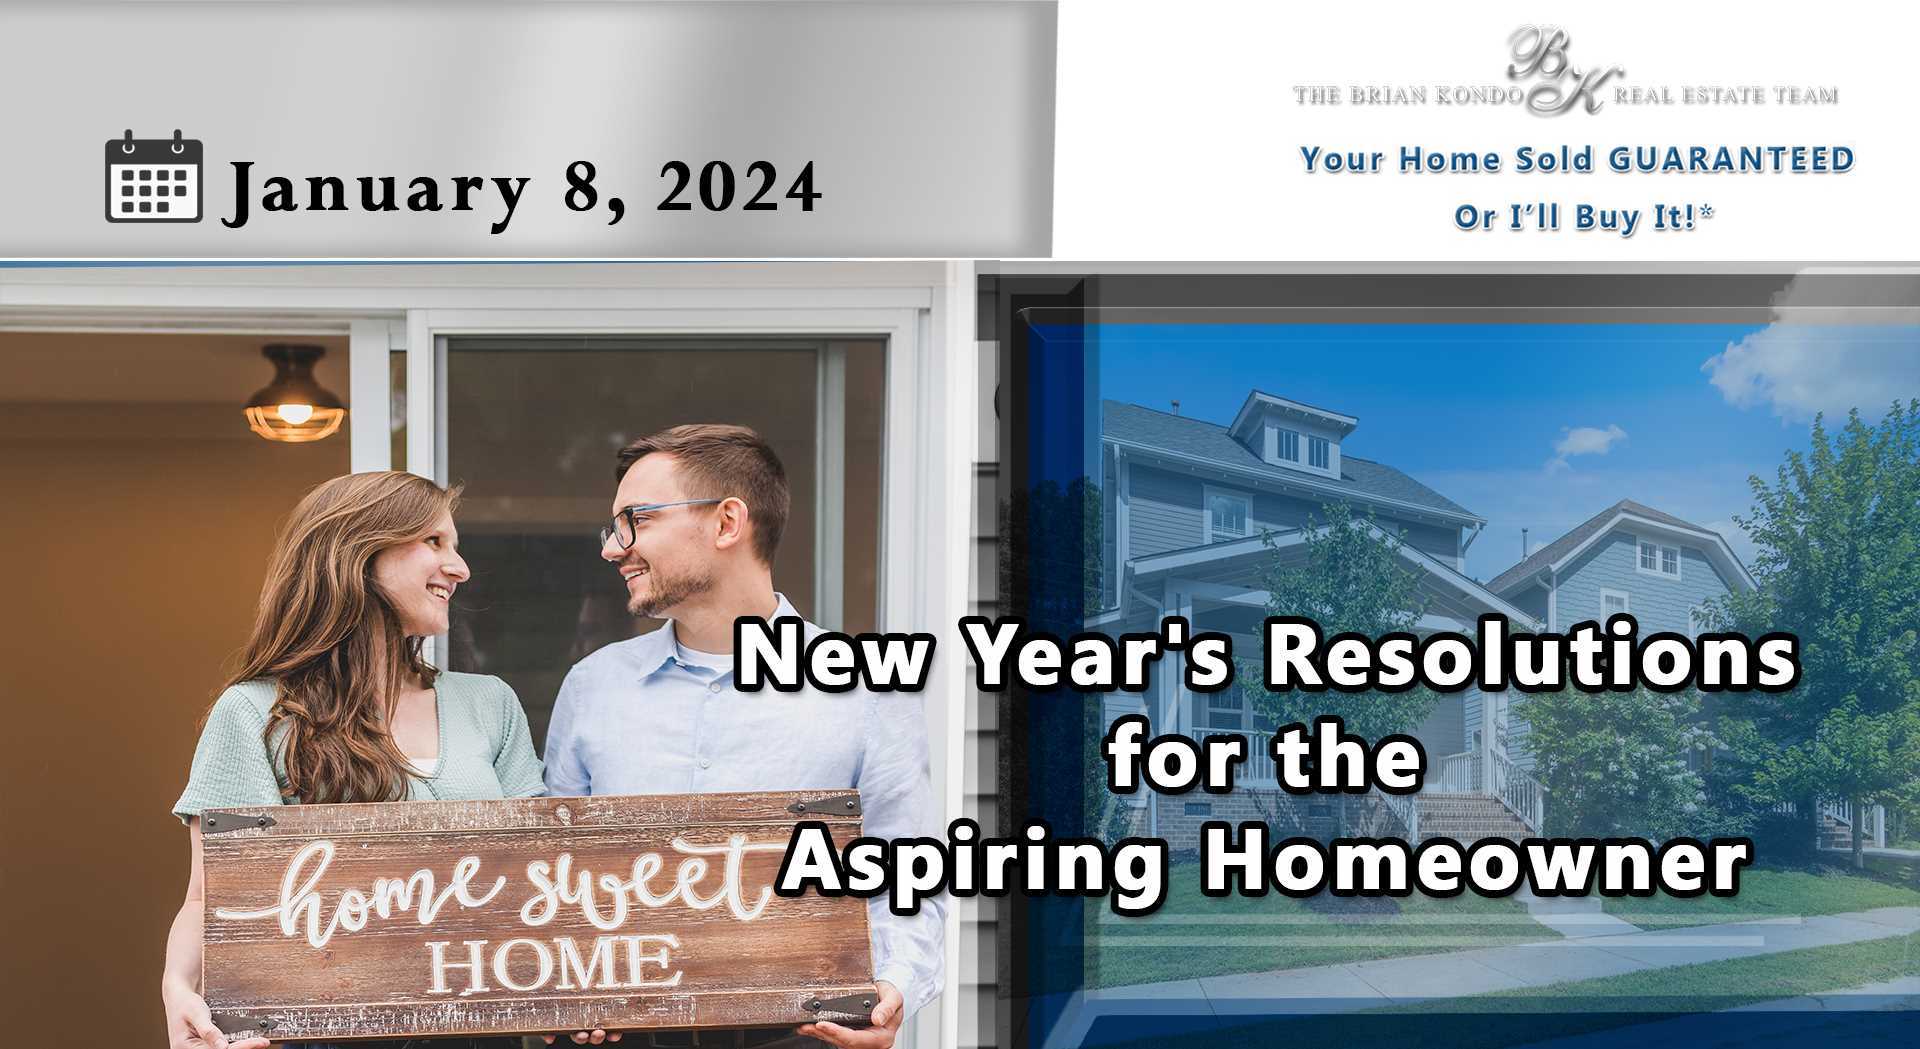 New Year's Resolutions for the Aspiring Homeowner